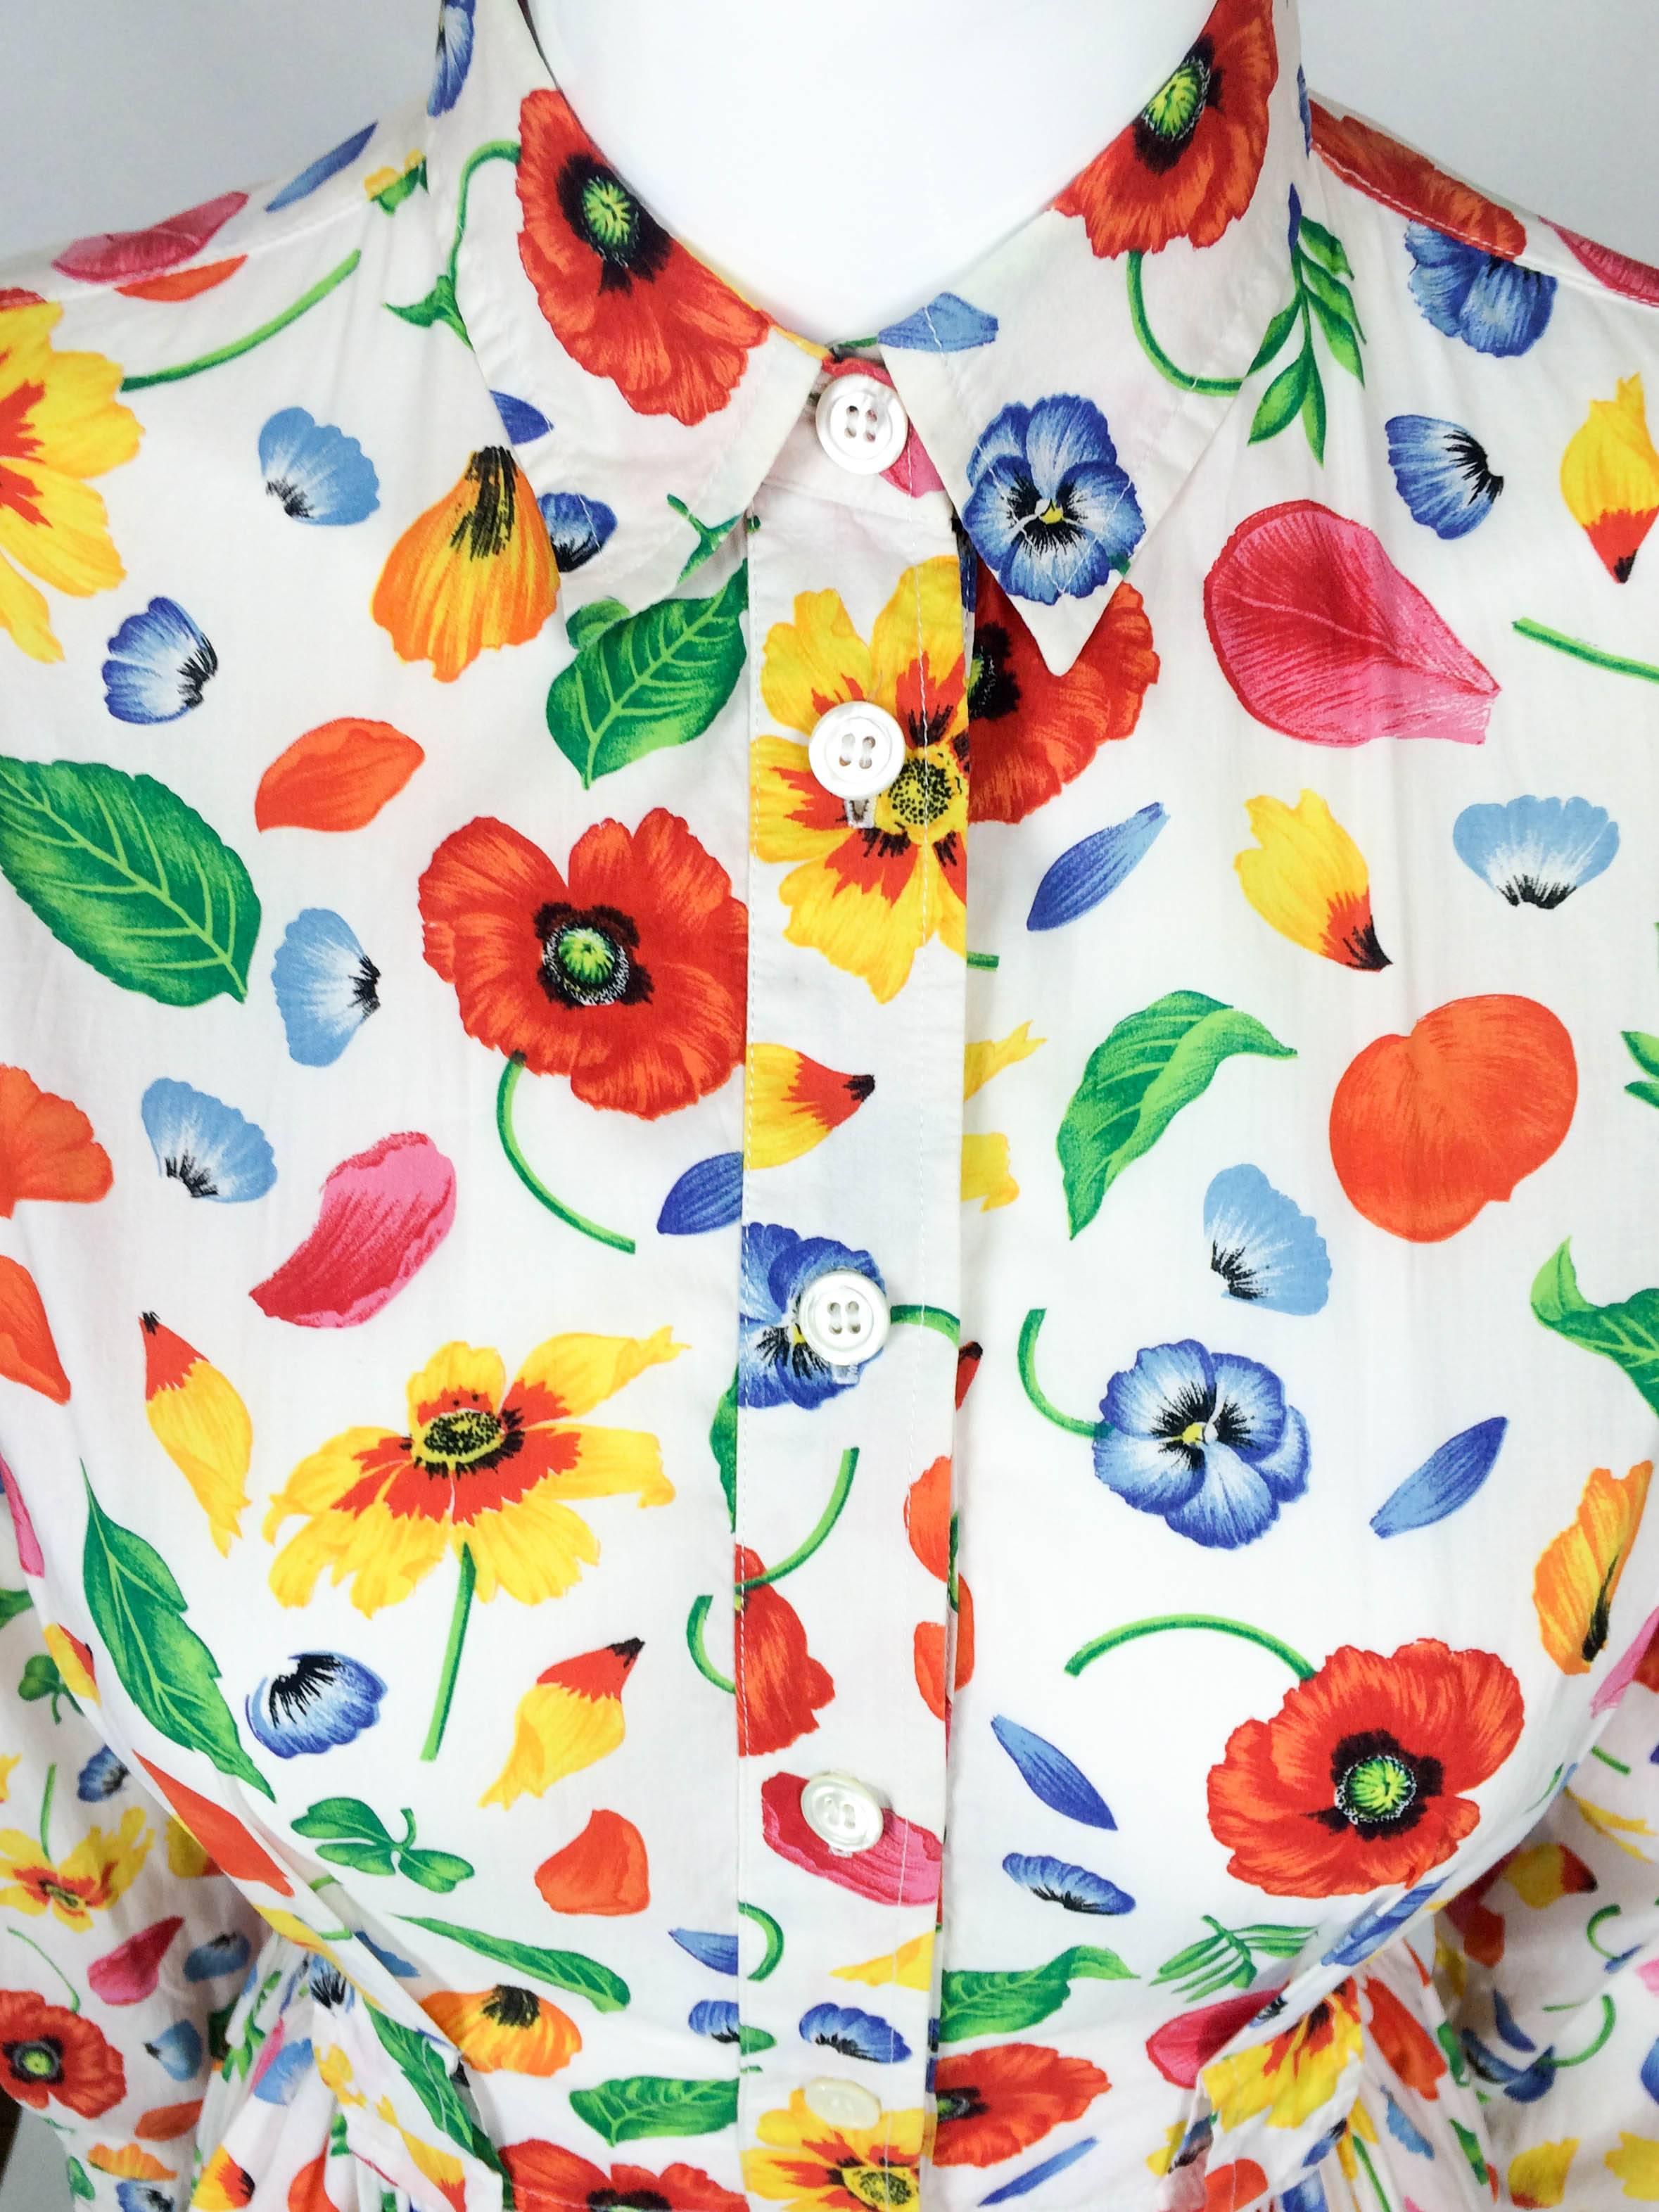 Kenzo Floral Shirt Dress - 1970s / 1980s In Excellent Condition For Sale In London, Chelsea